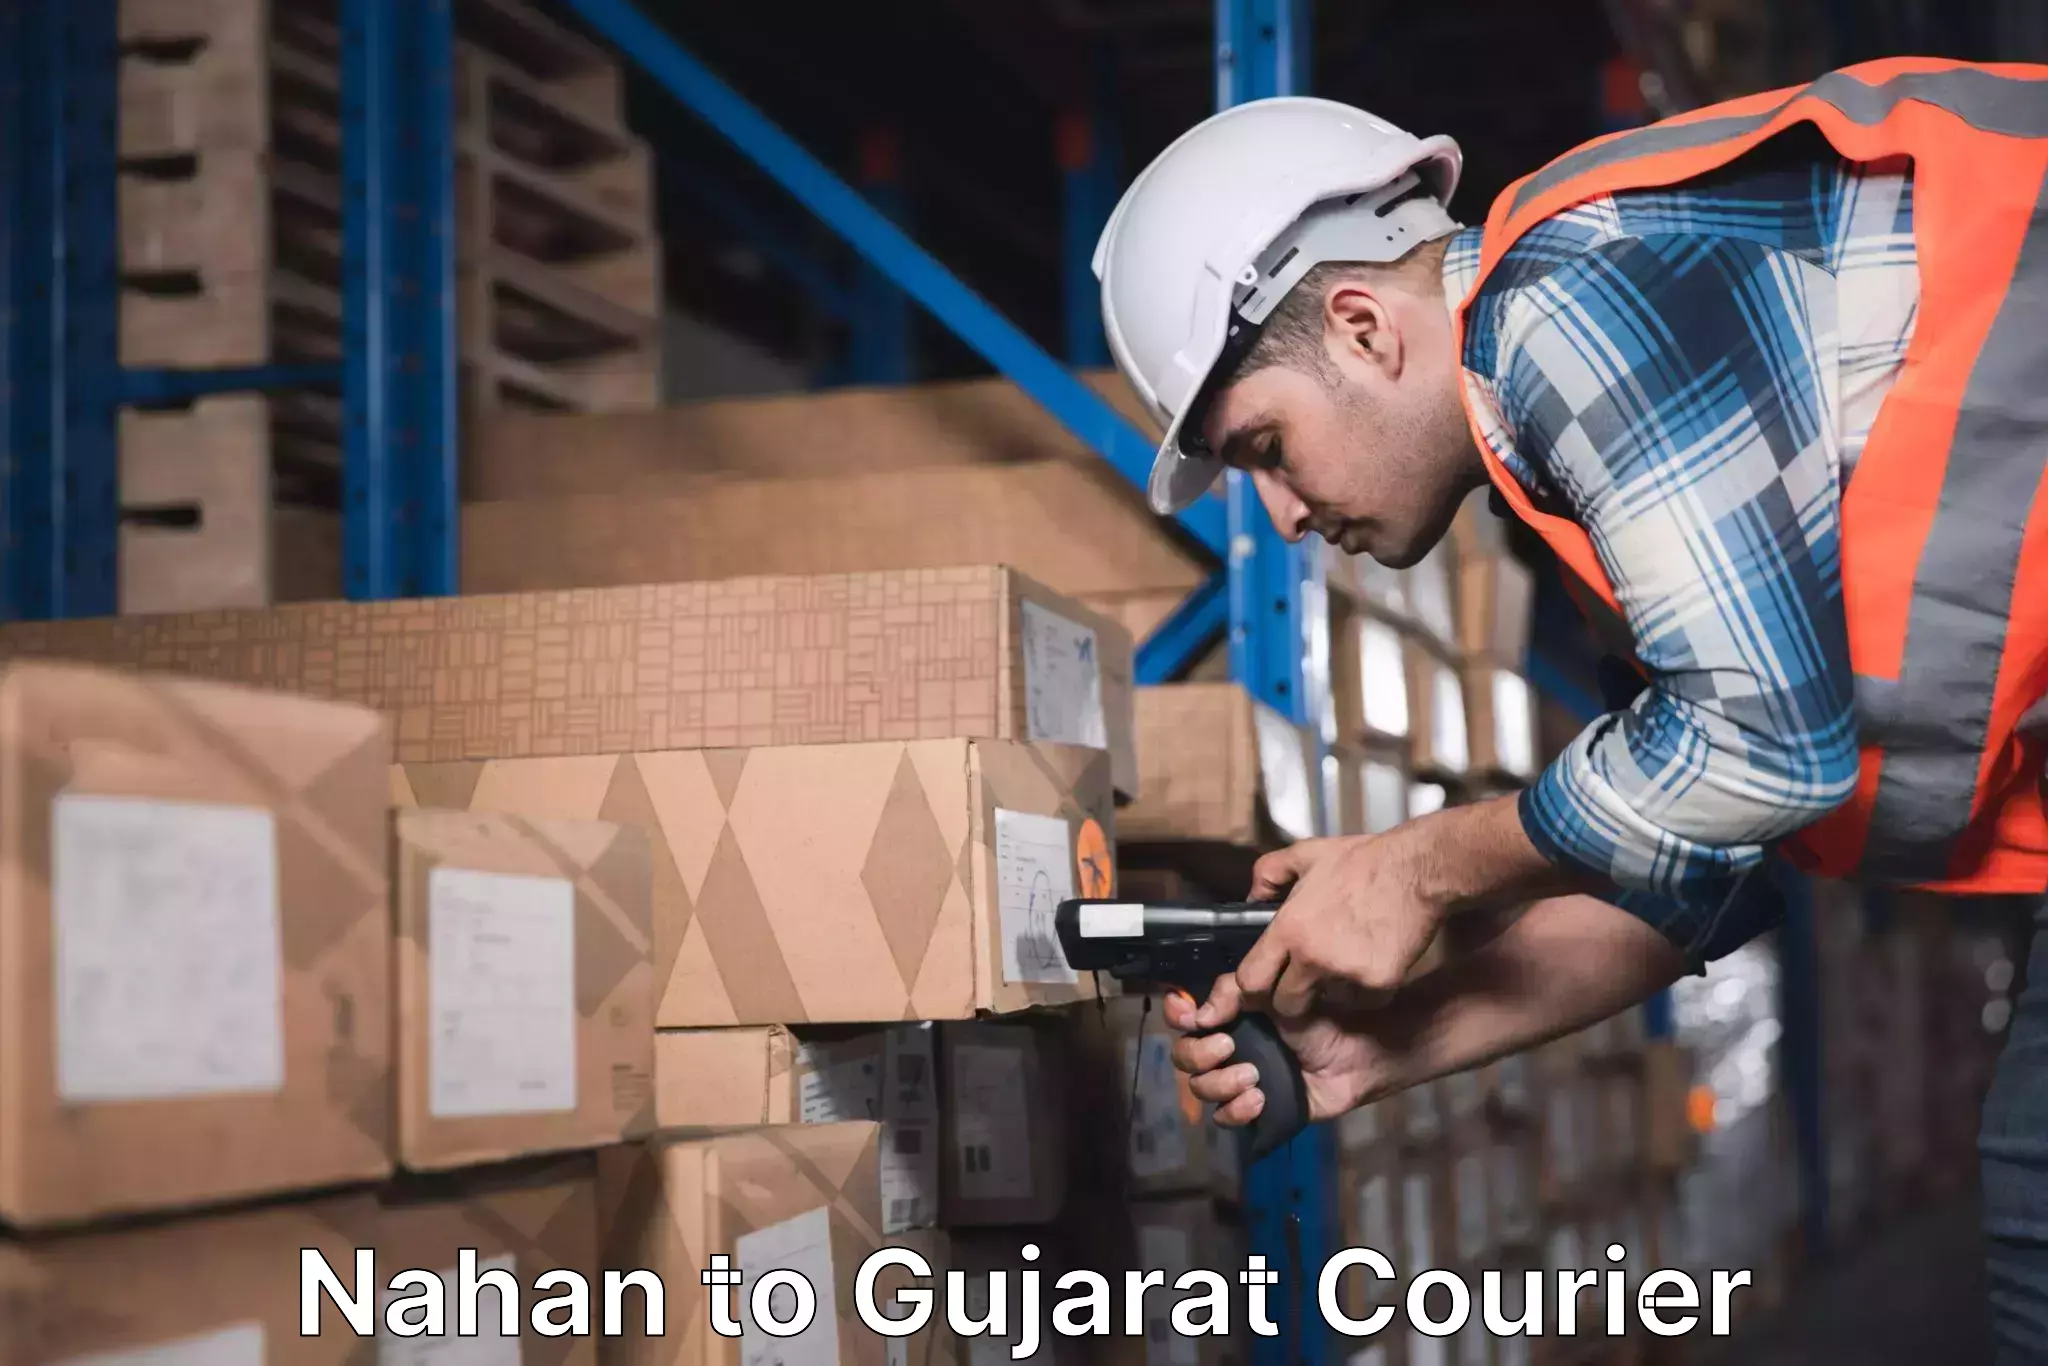 Courier rate comparison in Nahan to Kandla Port